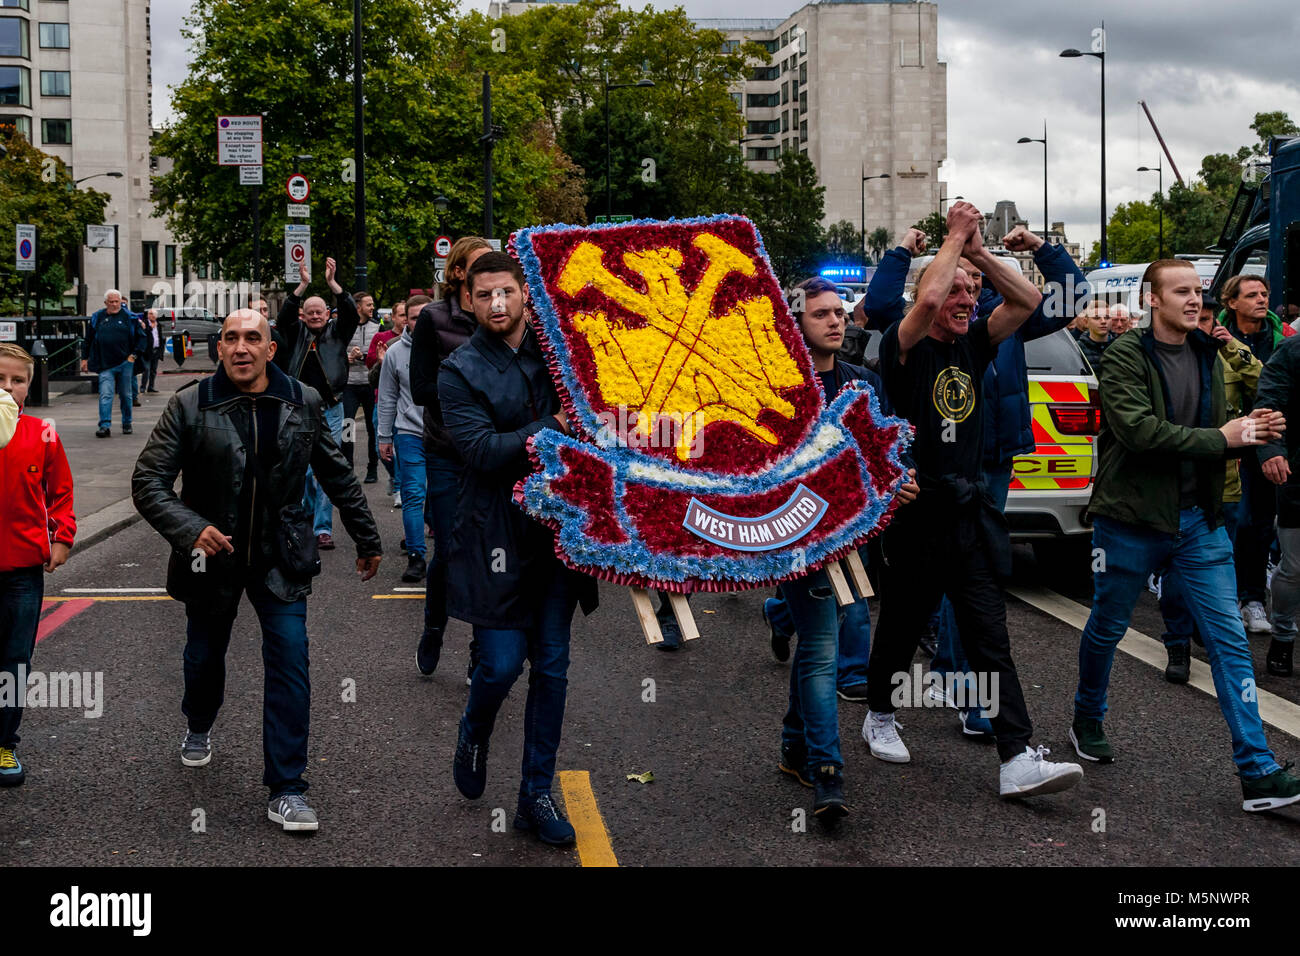 Football fans from across the Uk gather in Central London to march against extremism under the banner of the FLA (football lads alliance), London, UK Stock Photo